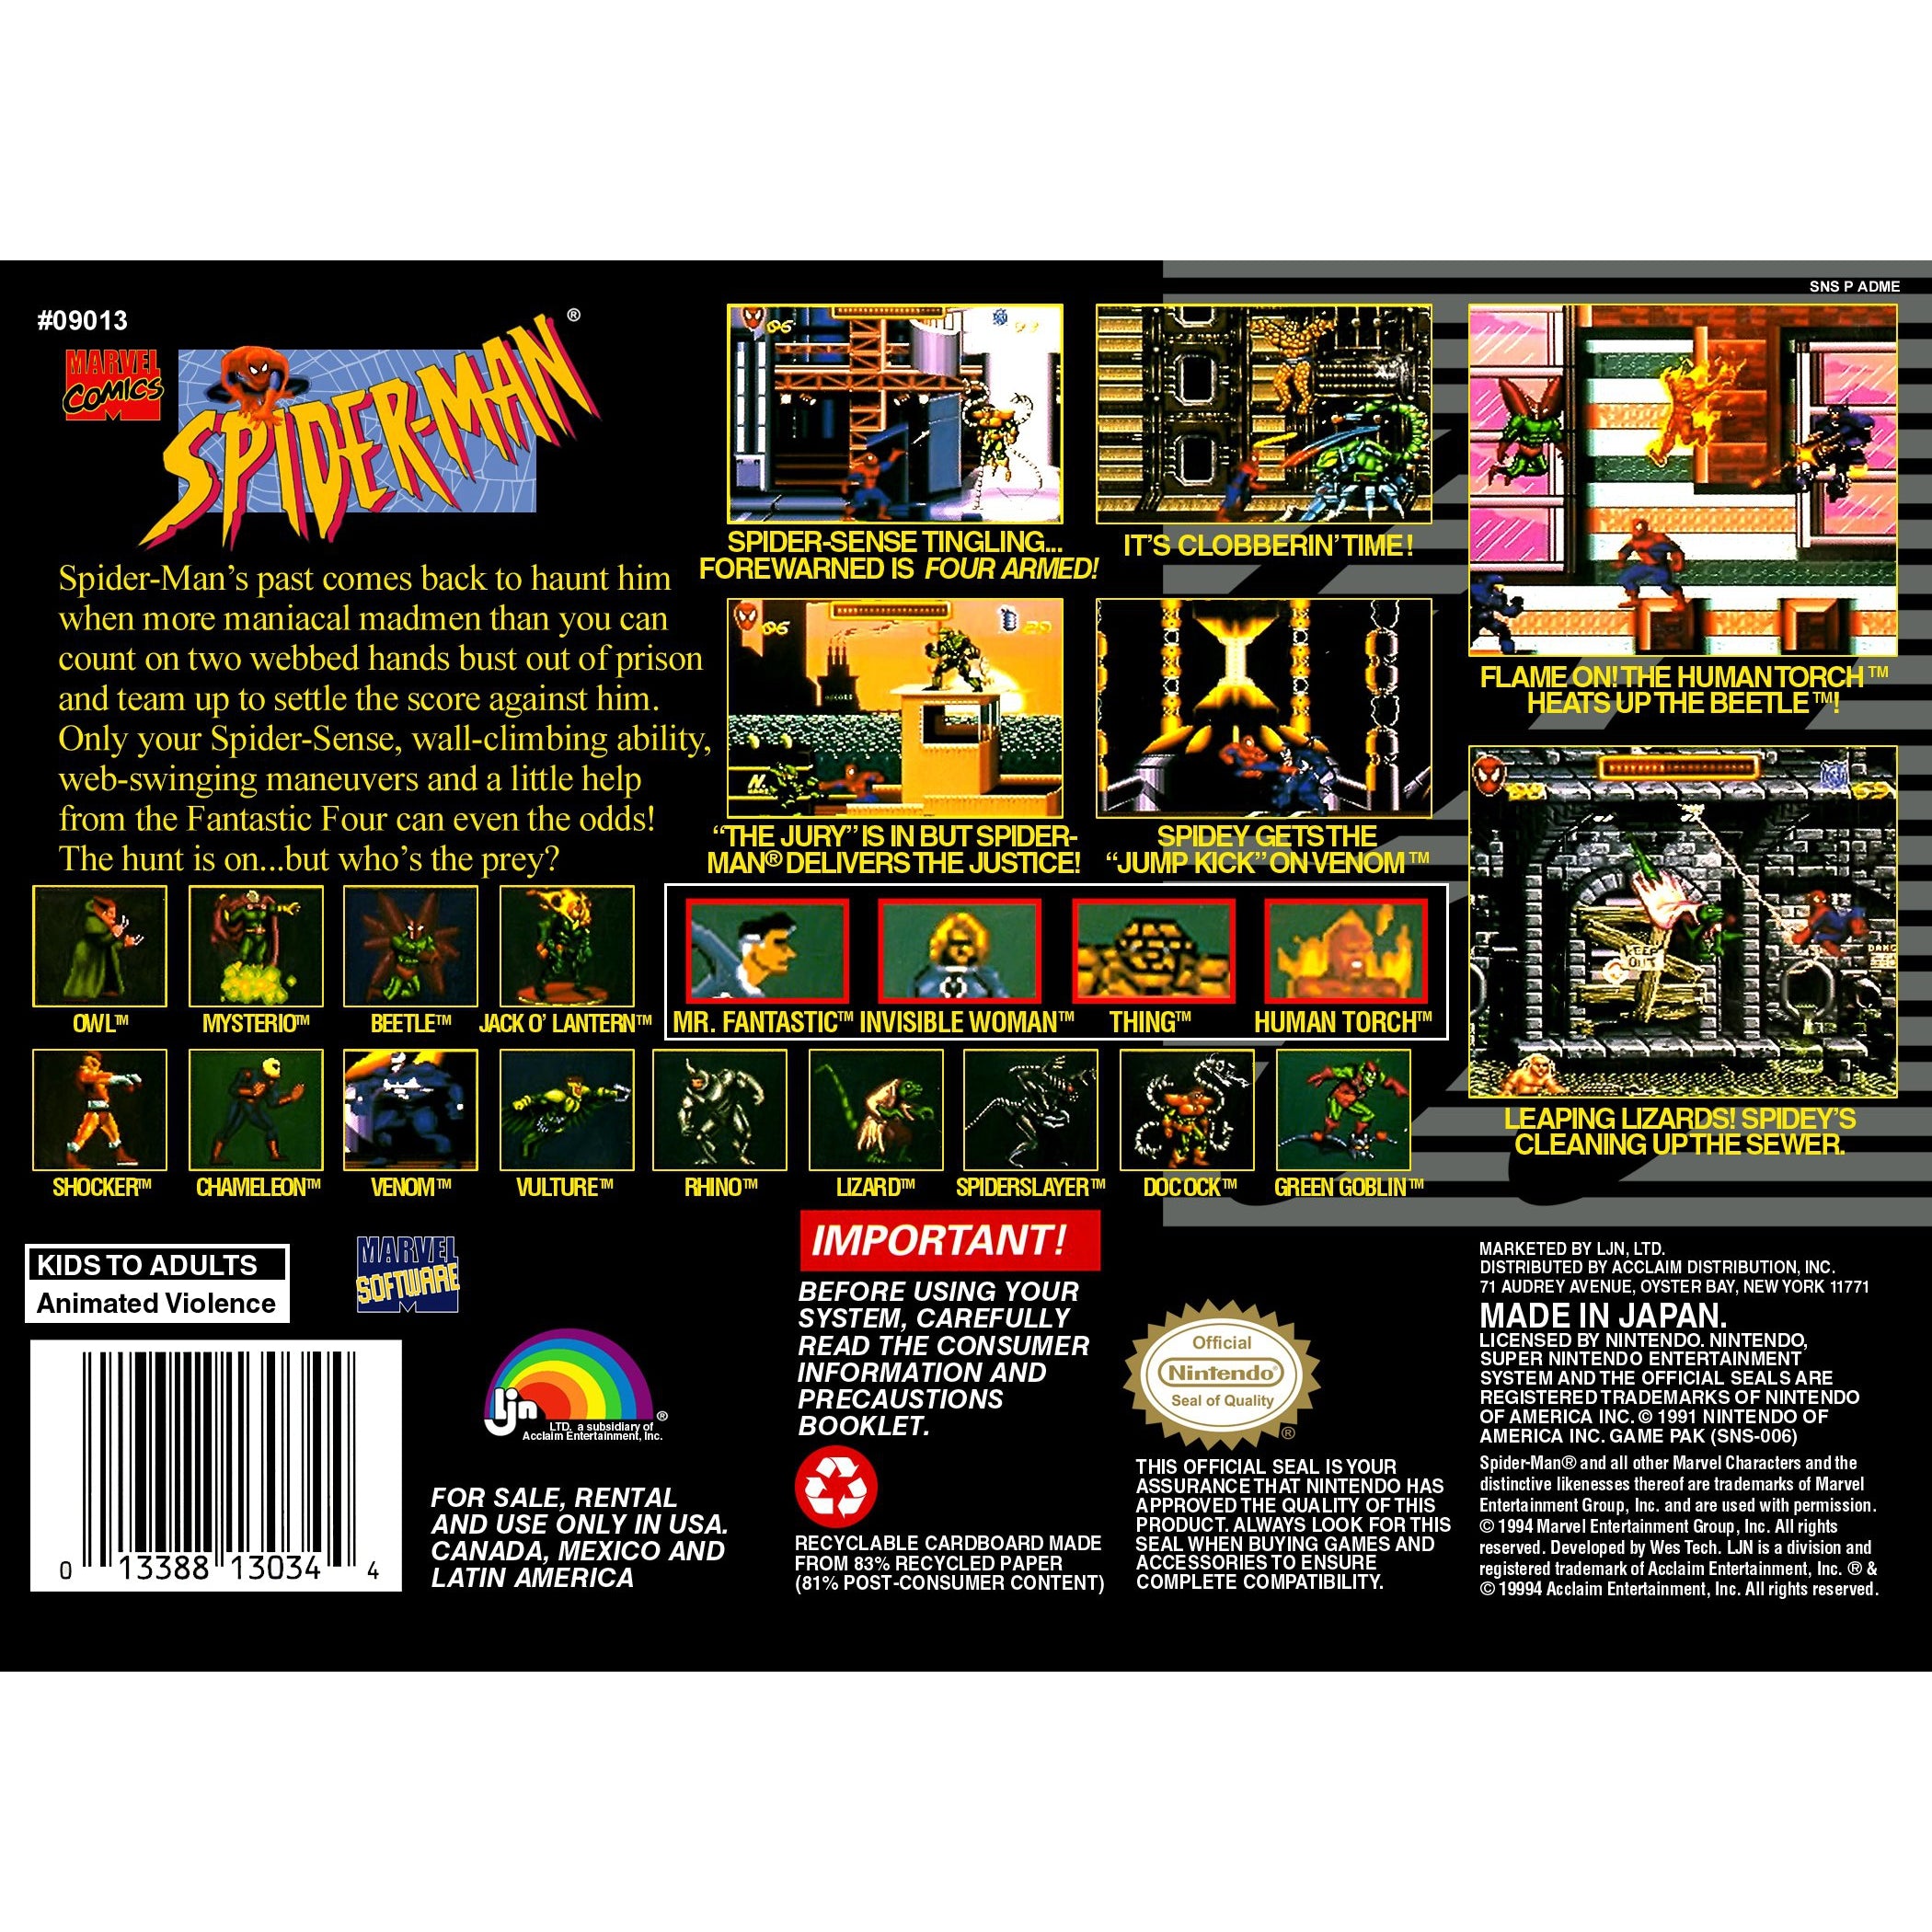 Spider-Man - Super Nintendo (SNES) Game Cartridge - YourGamingShop.com - Buy, Sell, Trade Video Games Online. 120 Day Warranty. Satisfaction Guaranteed.